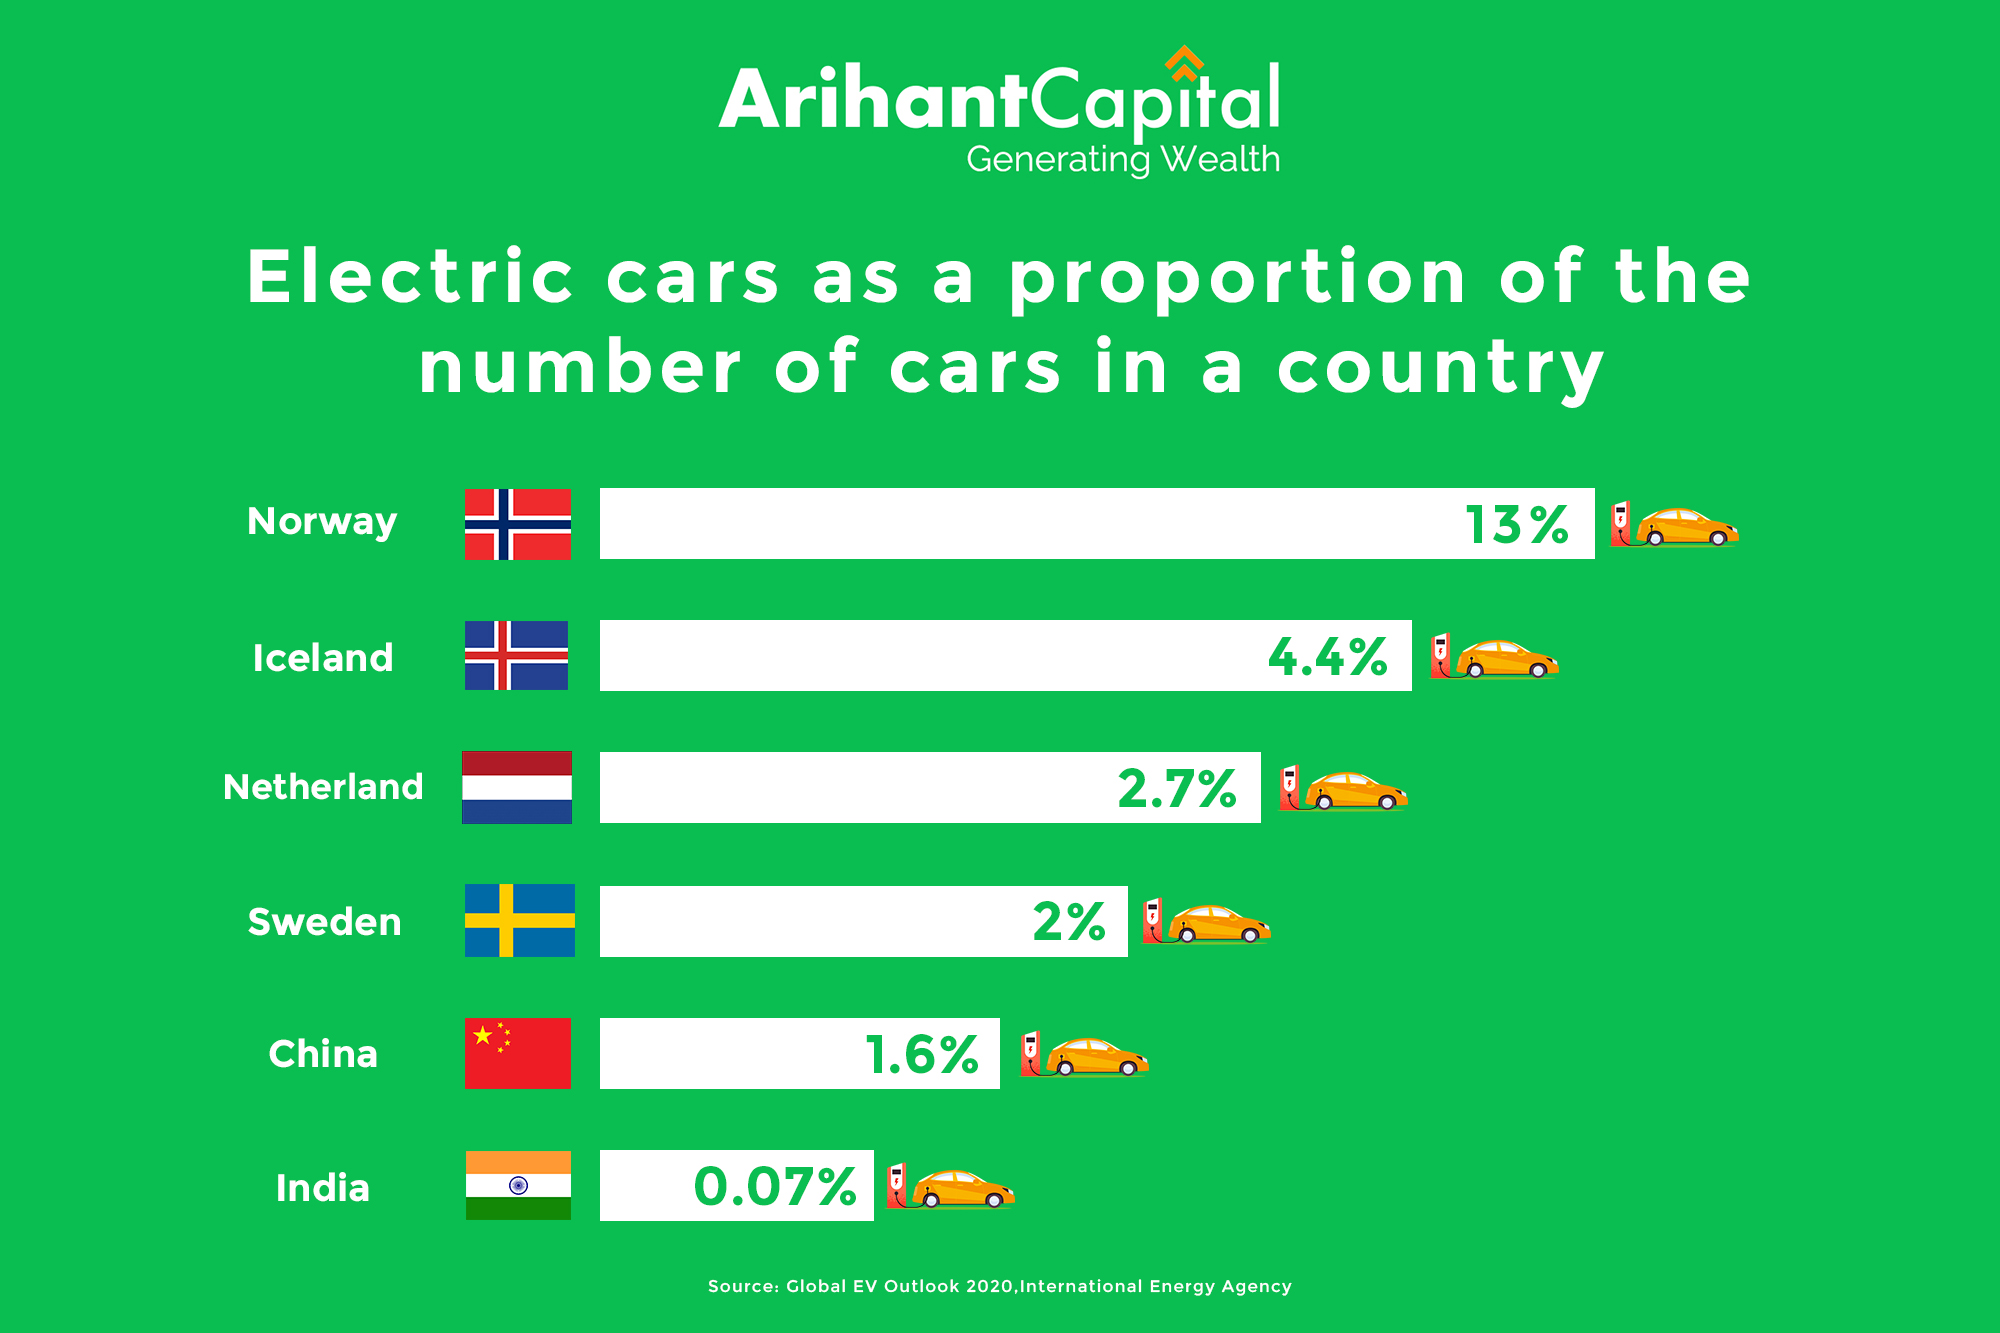 Electric Cars in India Should you buy & Stocks to Benefit from EV Growth